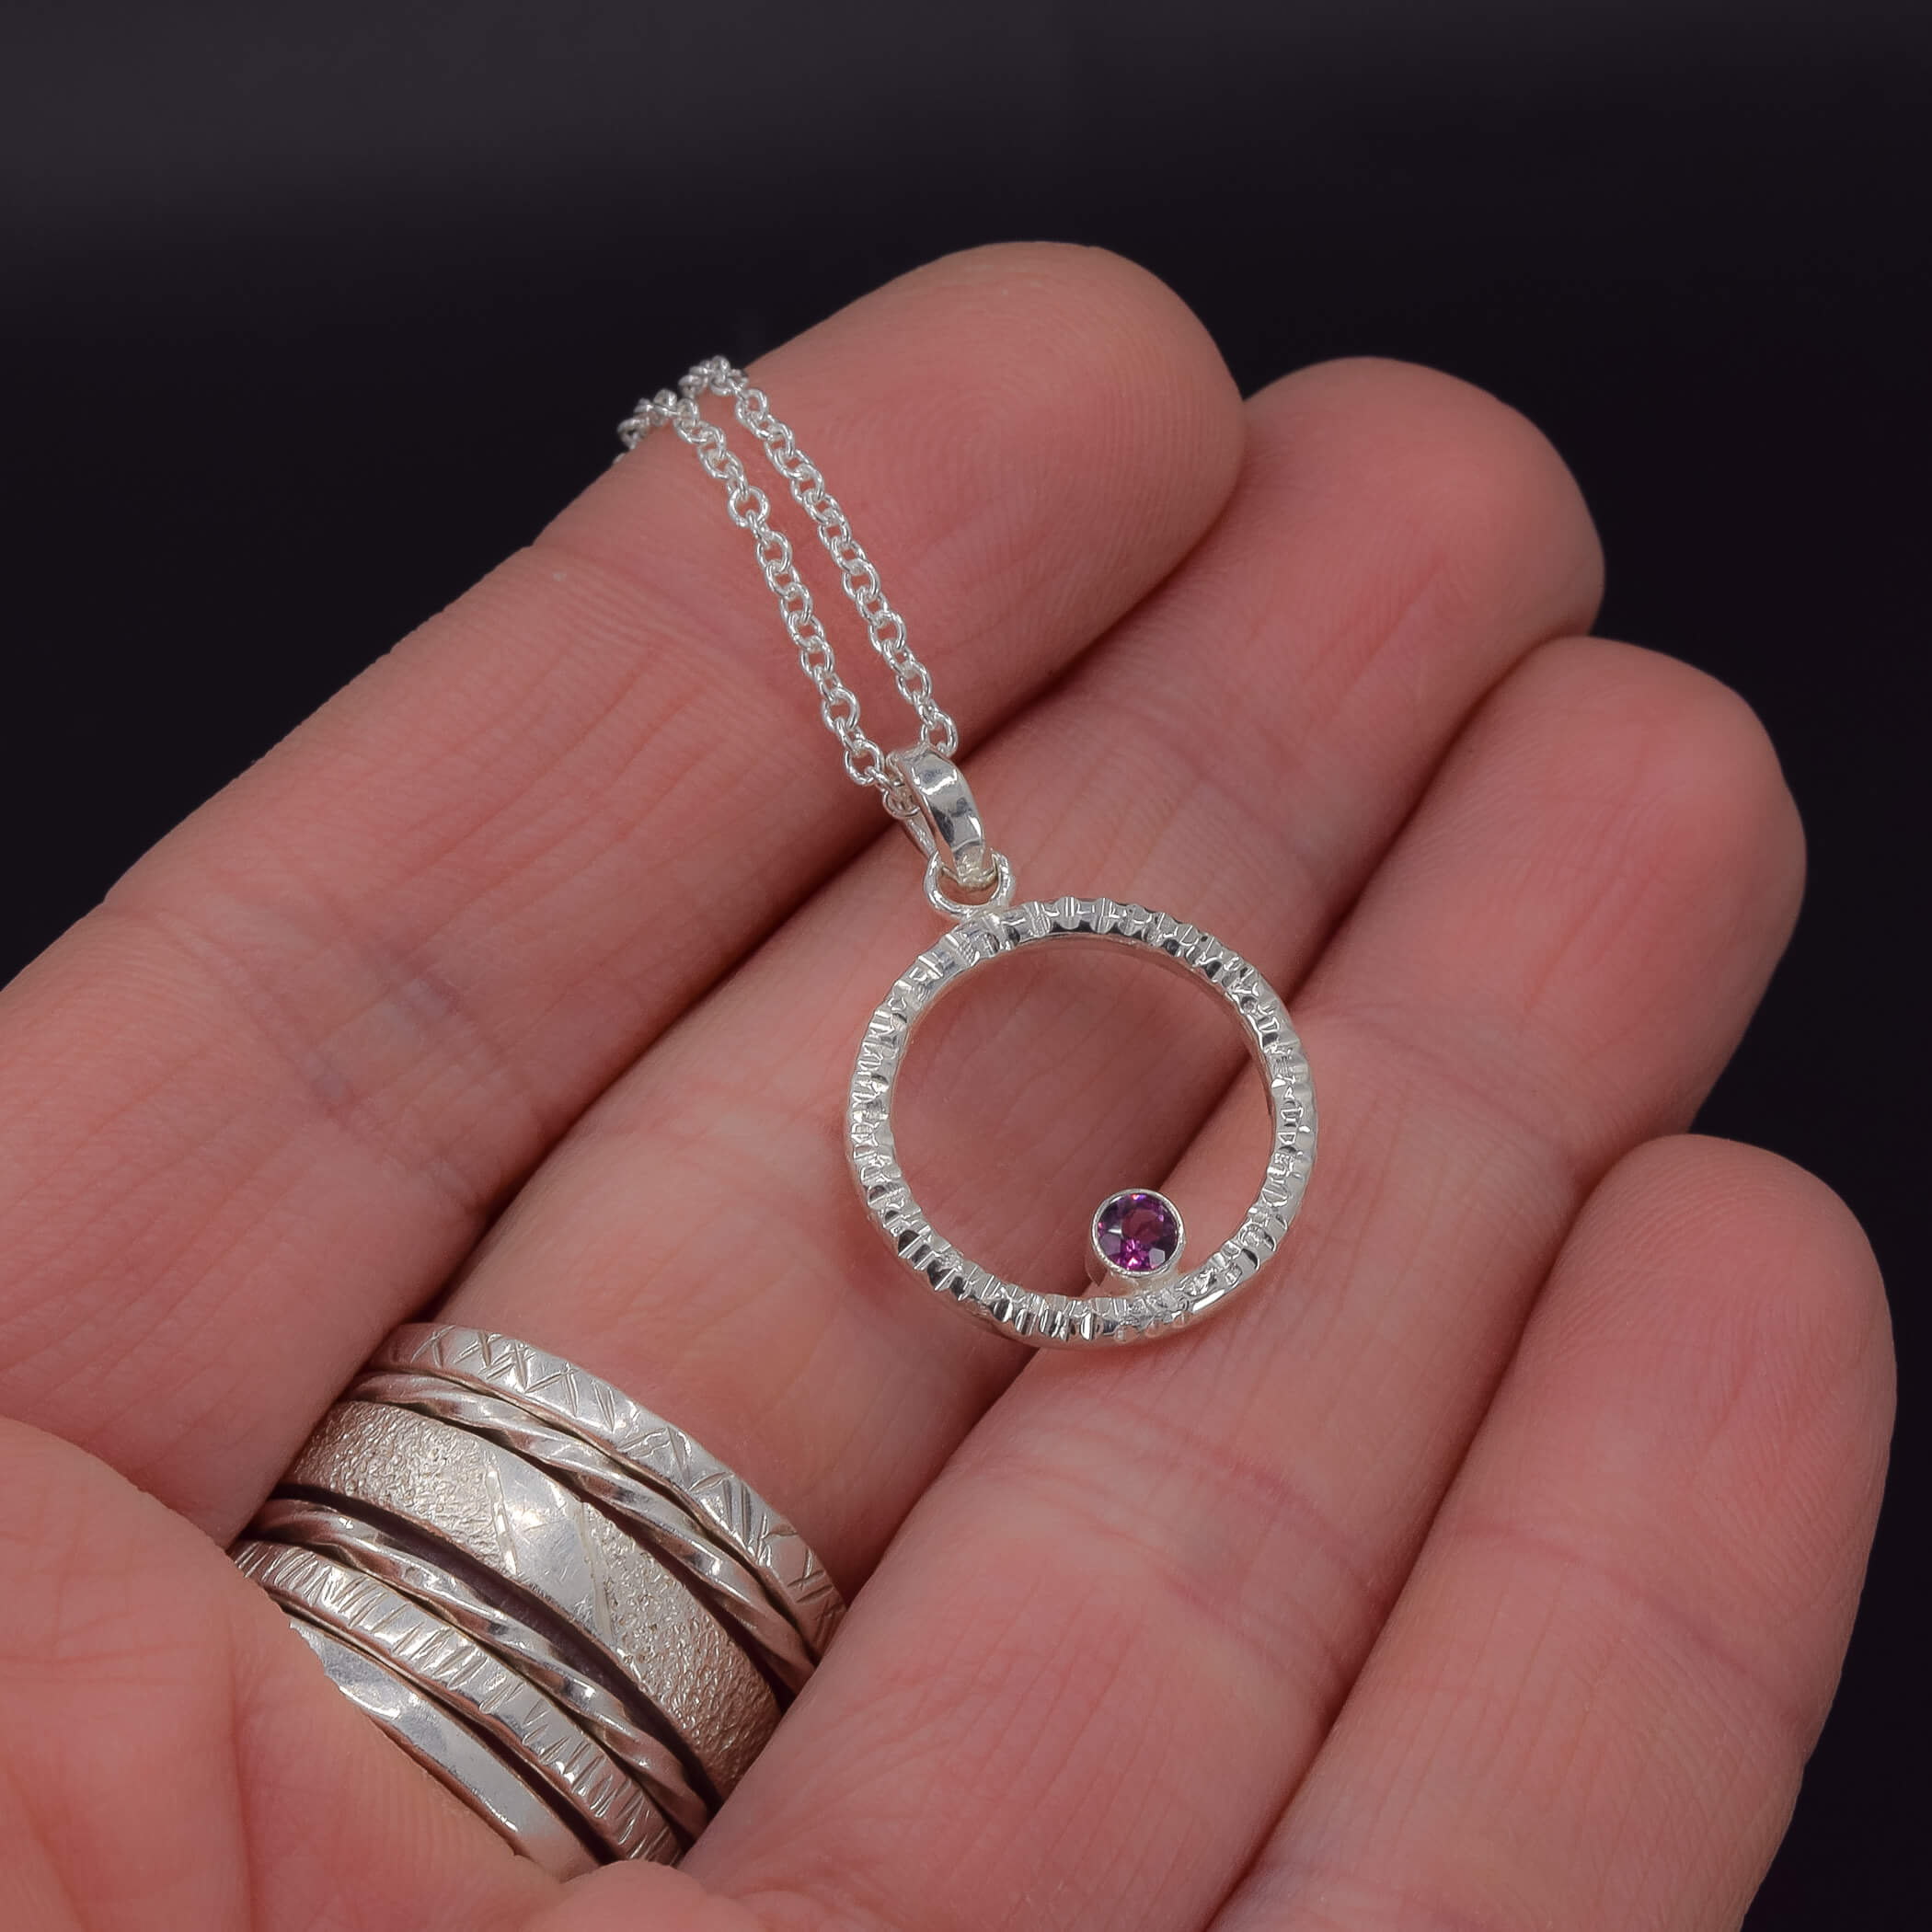 Circle of life pendant necklace in sterling silver with textured edges, featuring a rhodolite garnet faceted stone shown in hand for scale